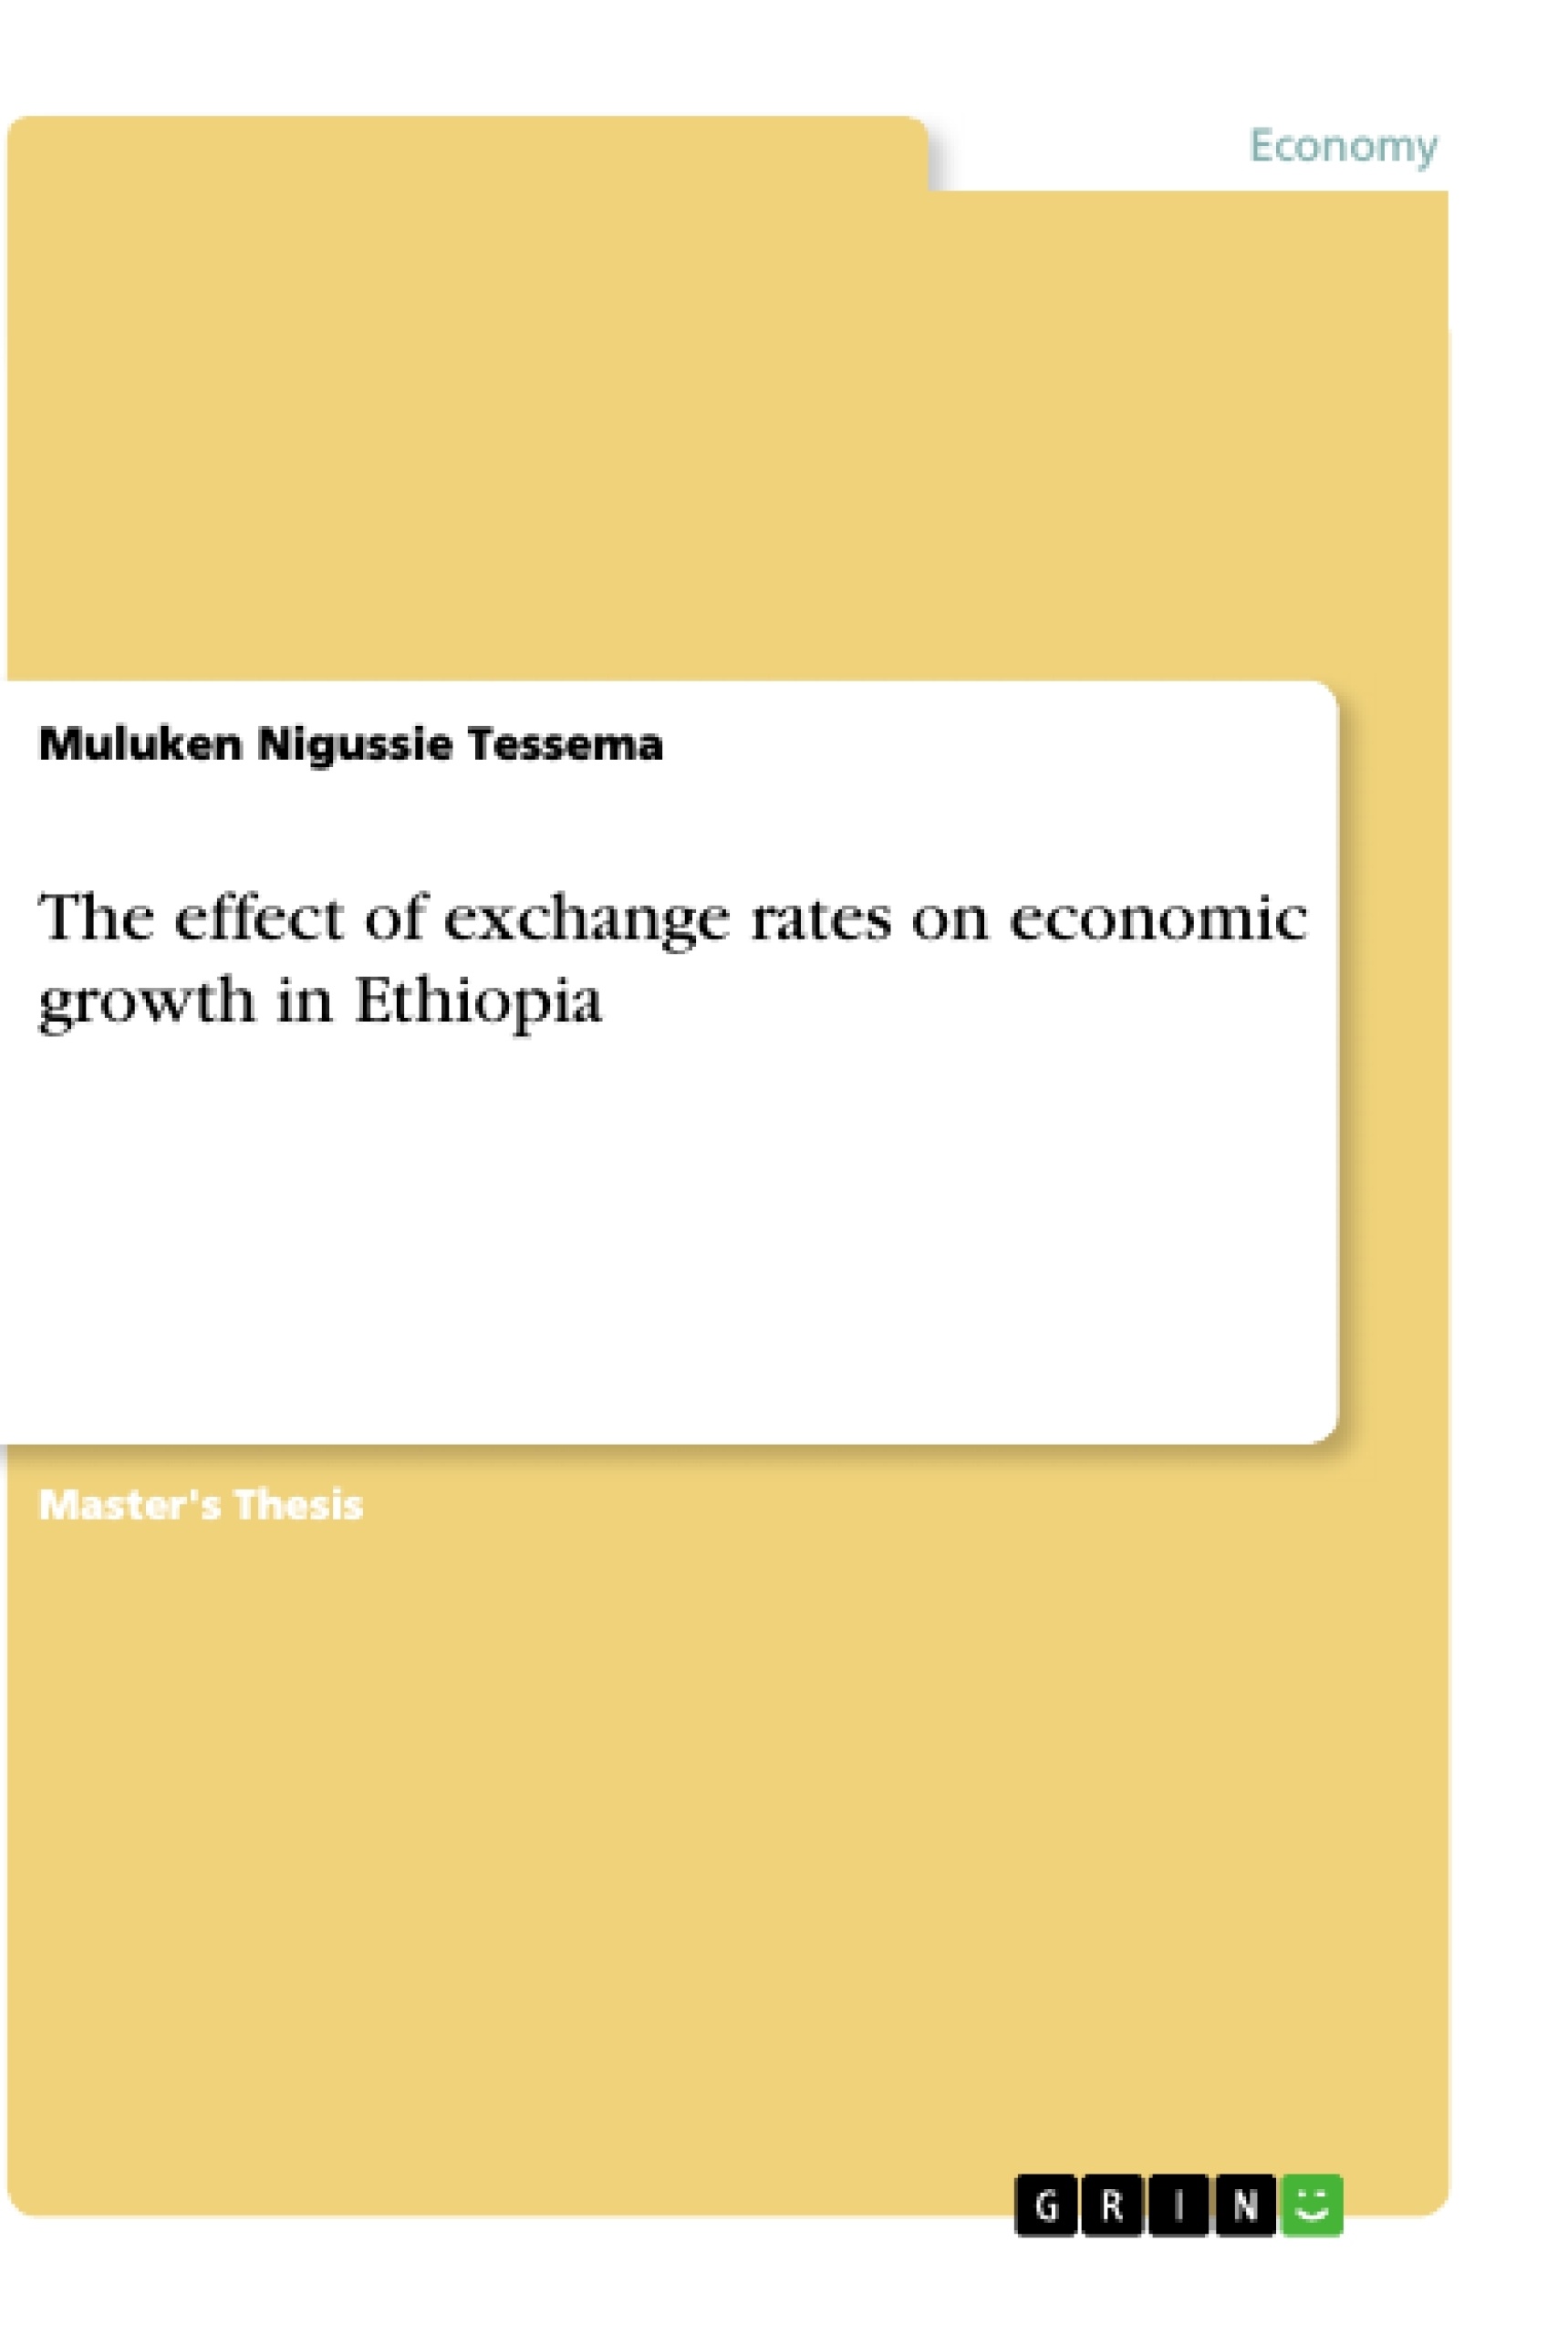 Title: The effect of exchange rates on economic growth in Ethiopia